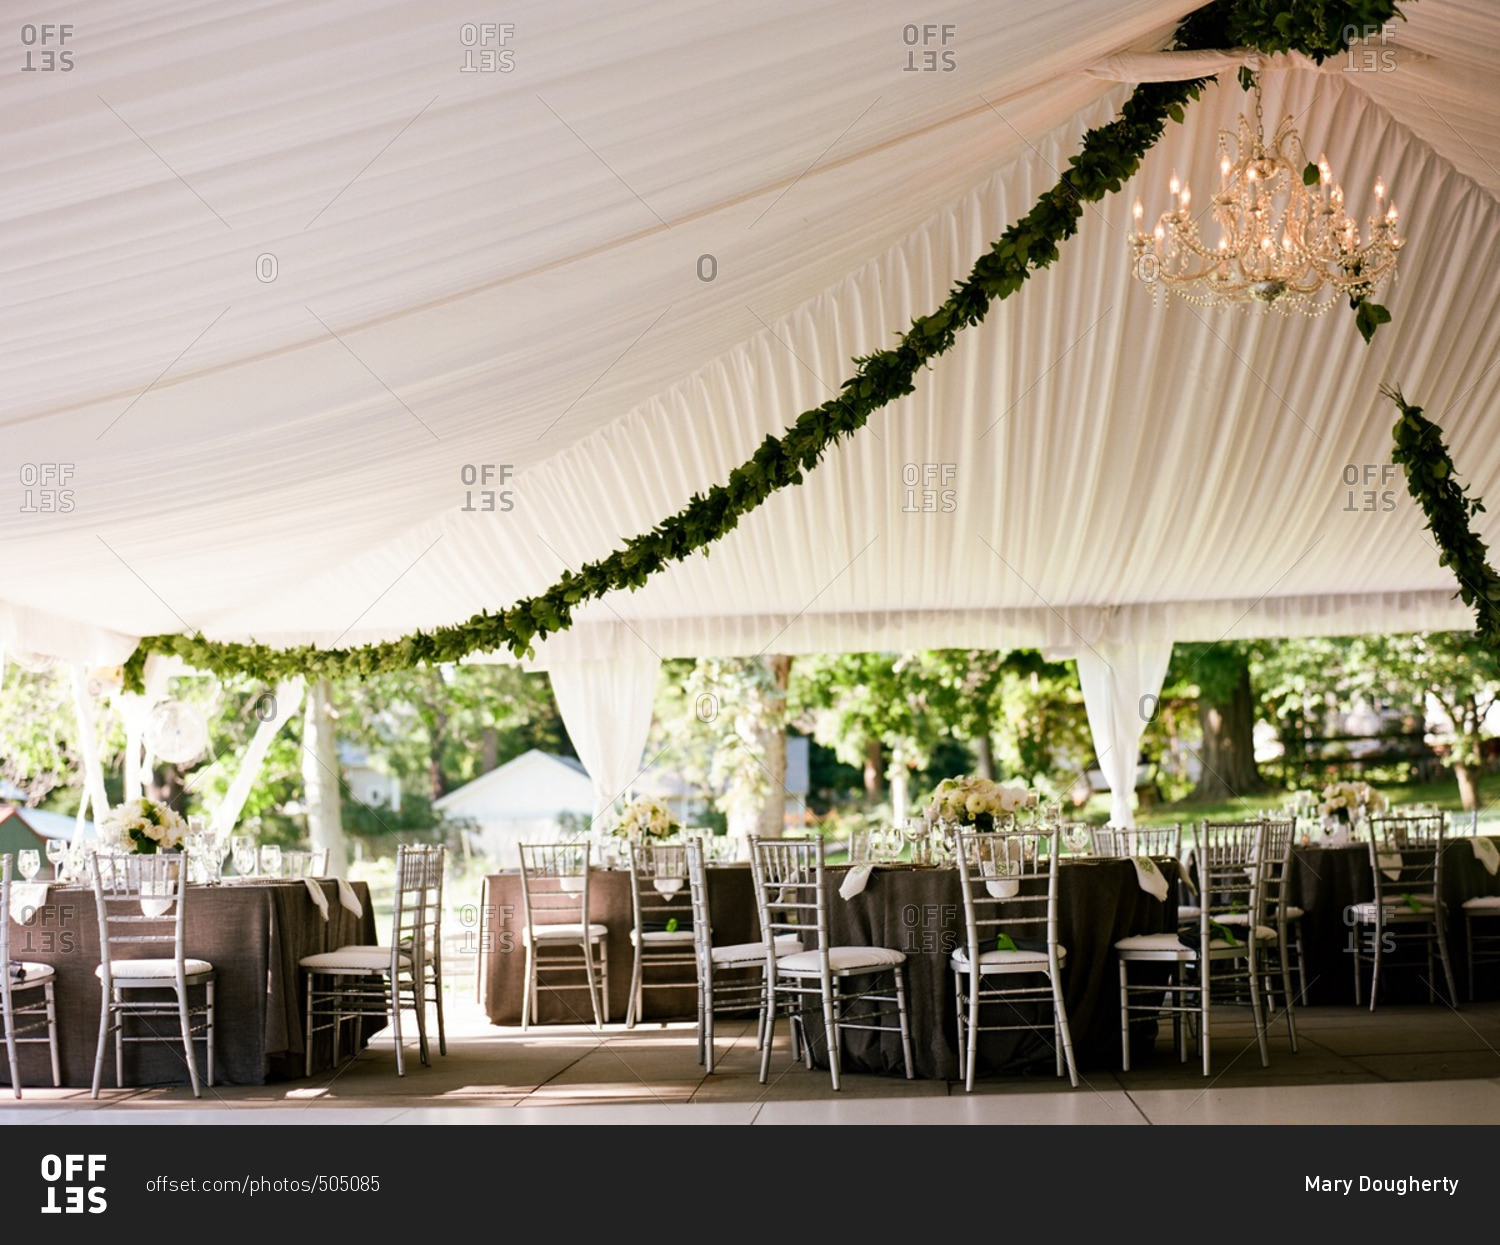 Tables set under a billowy white open-air canopy for a special event